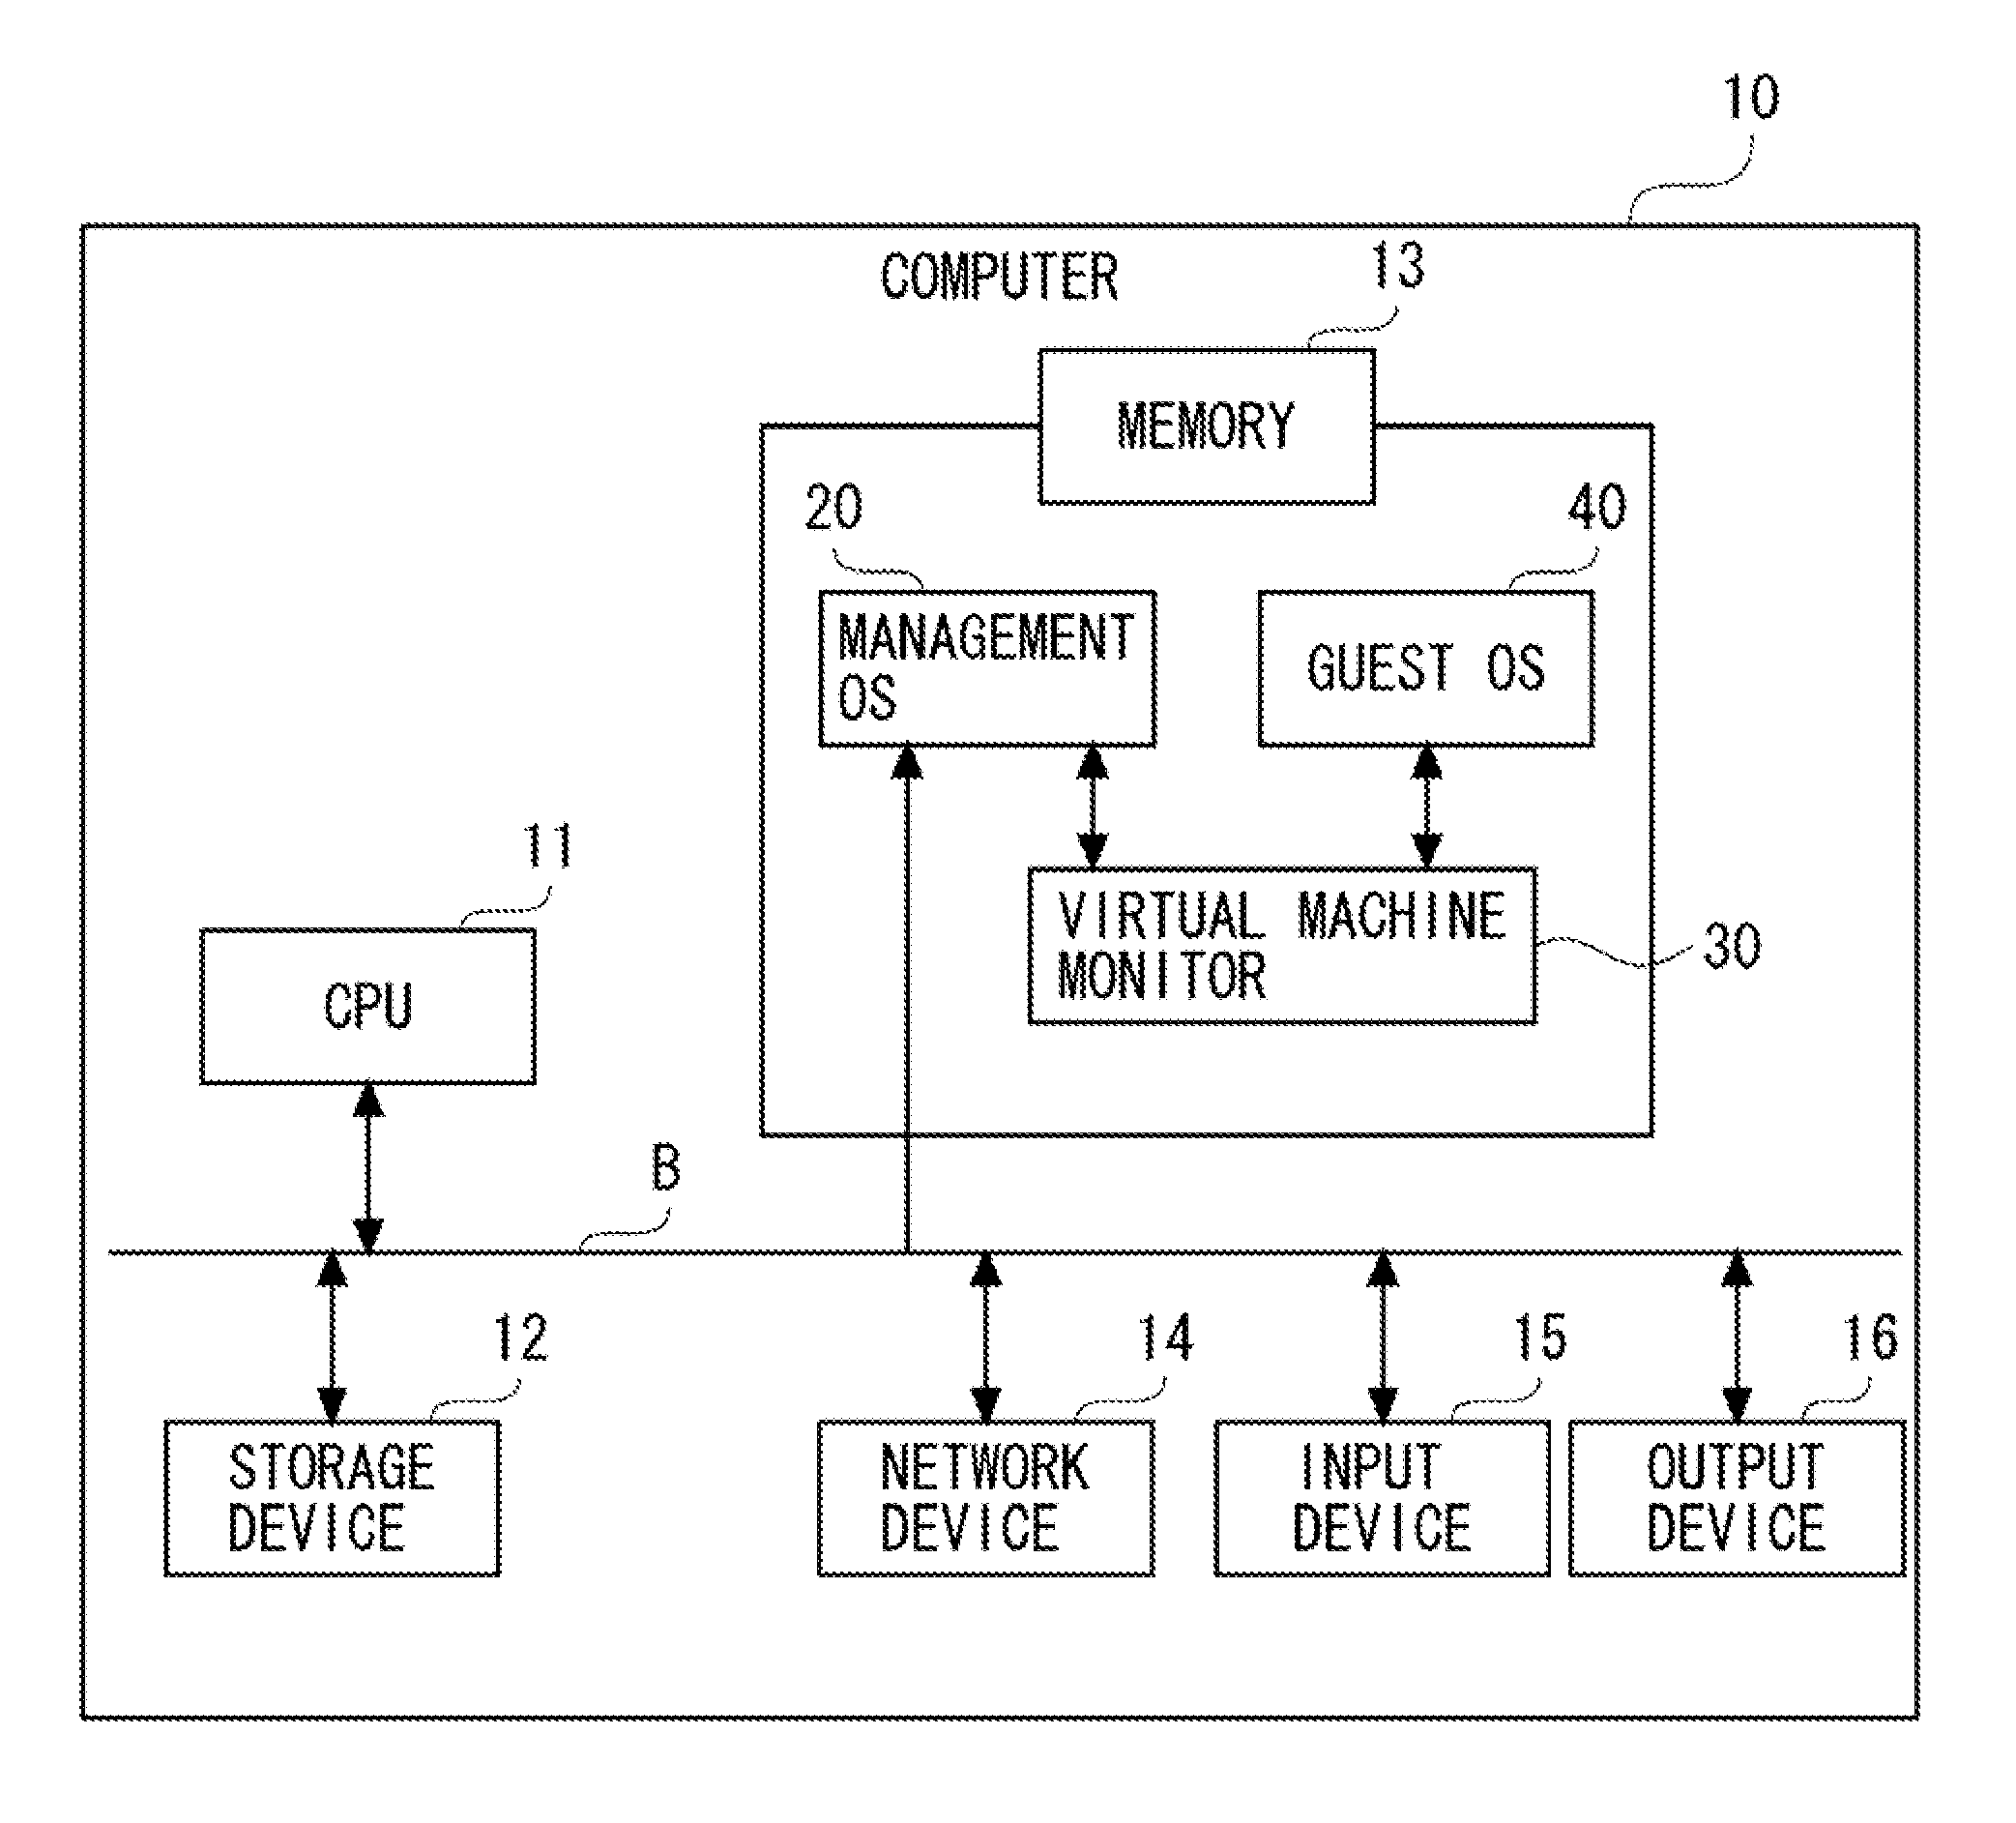 Disk access system switching device